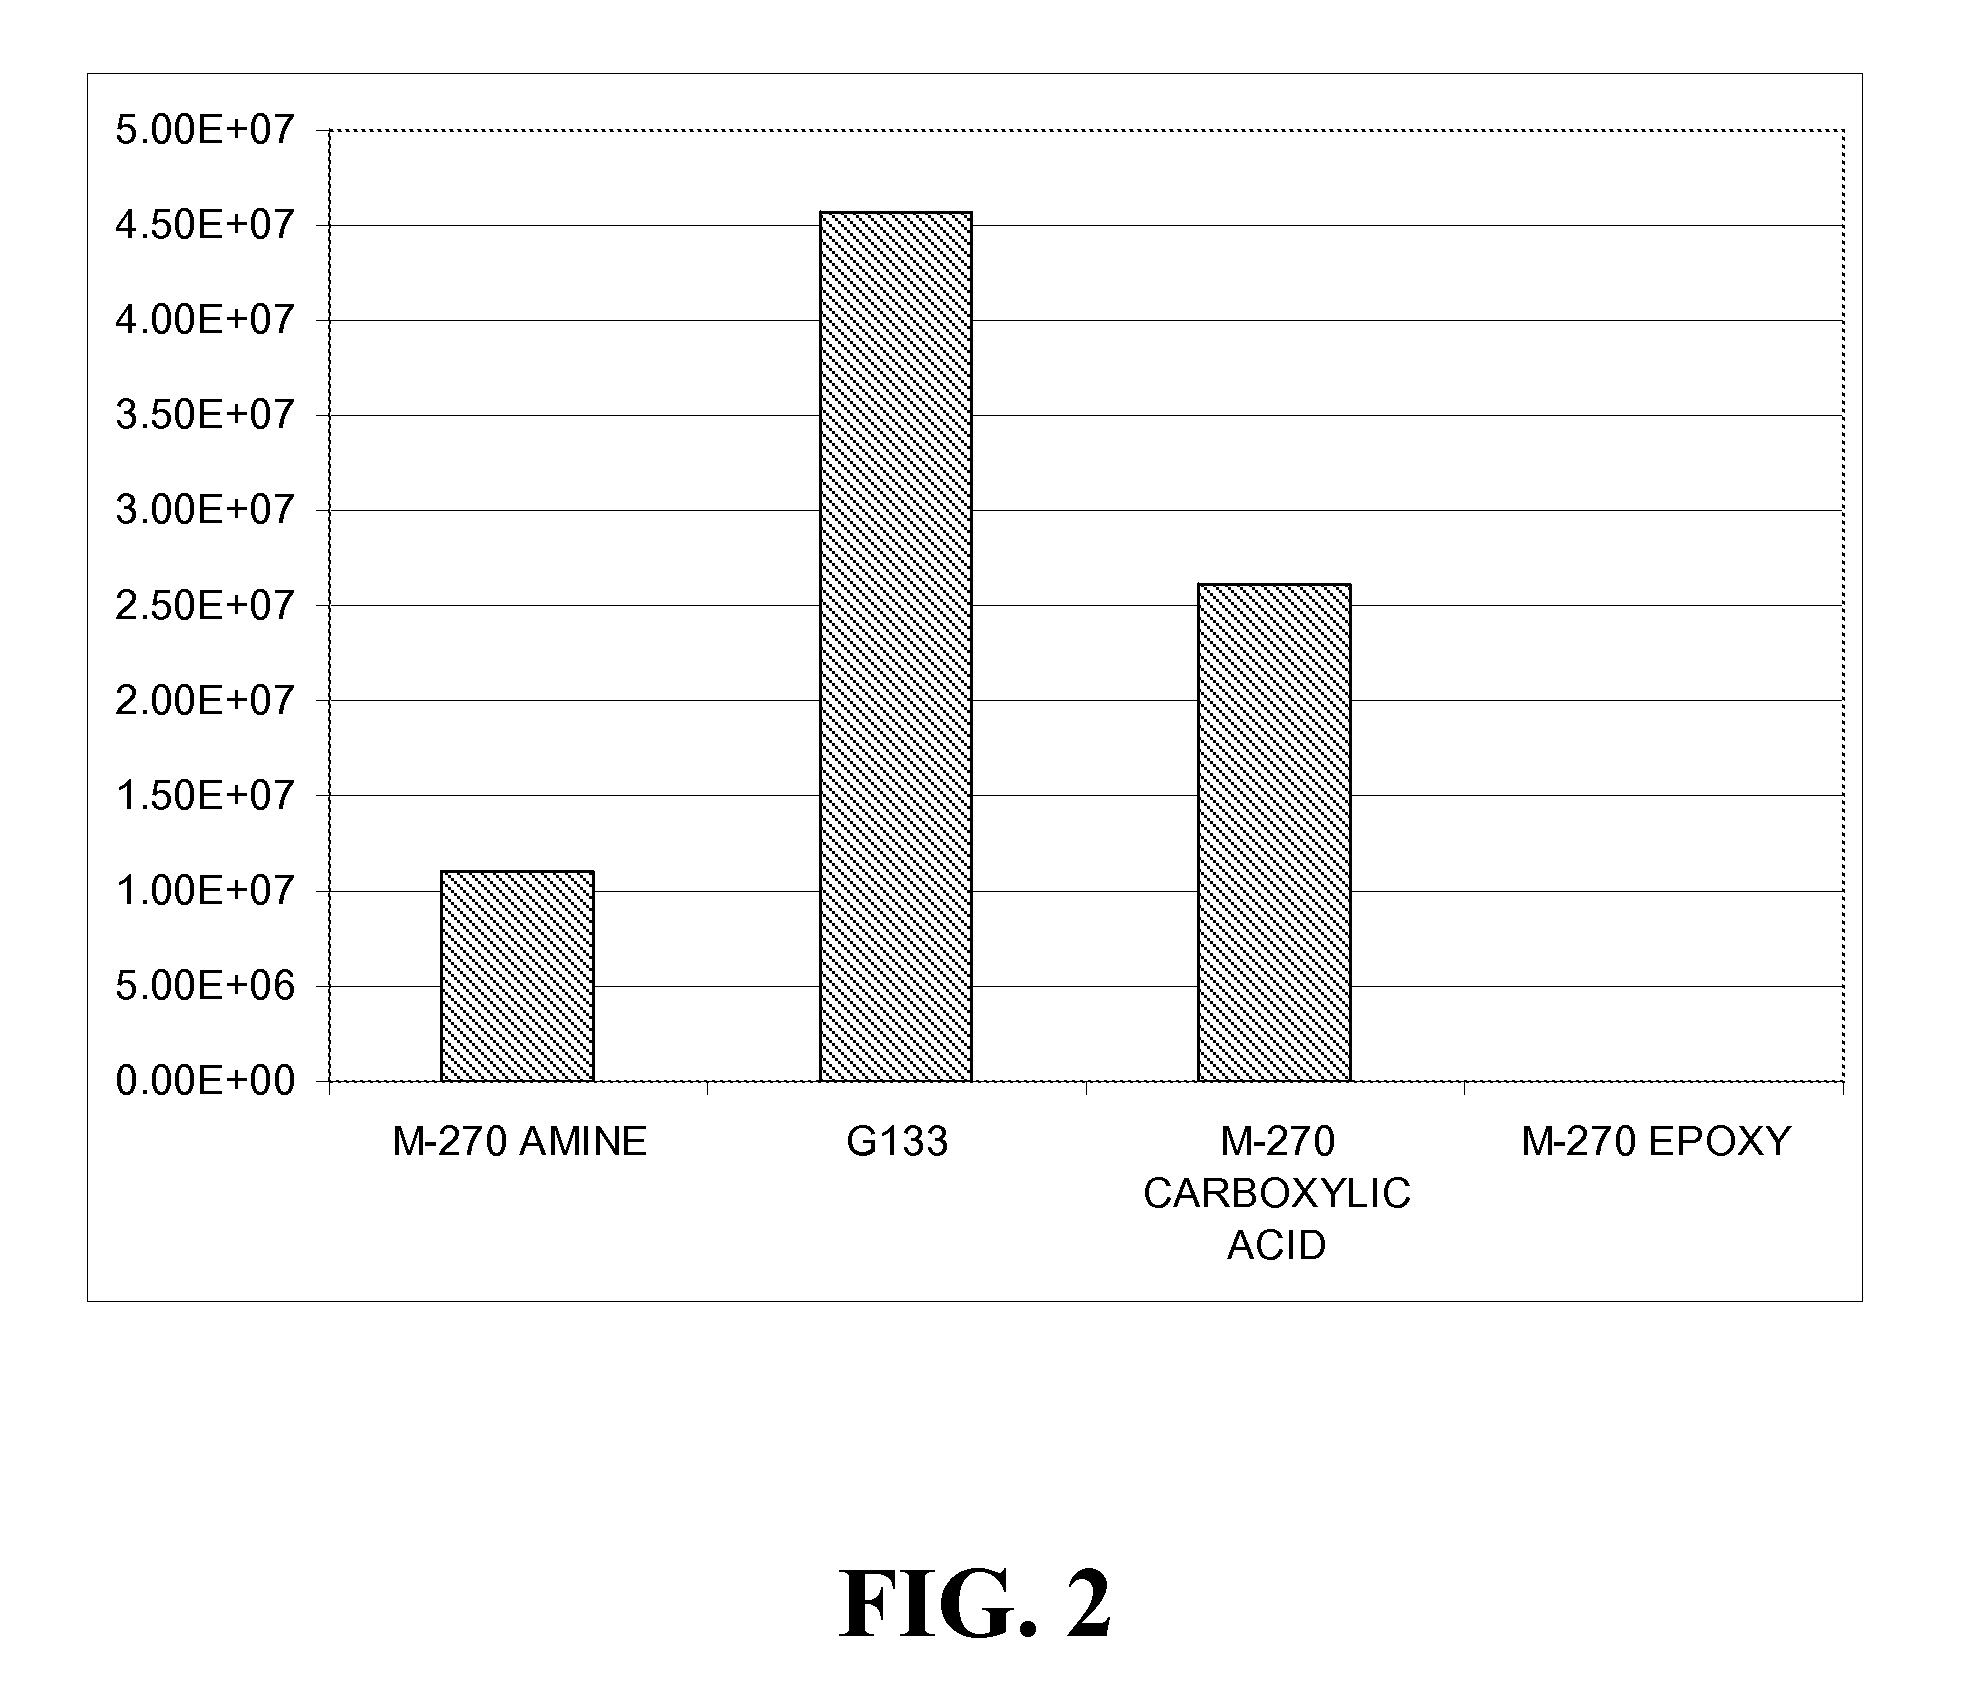 Particles containing multi-block polymers